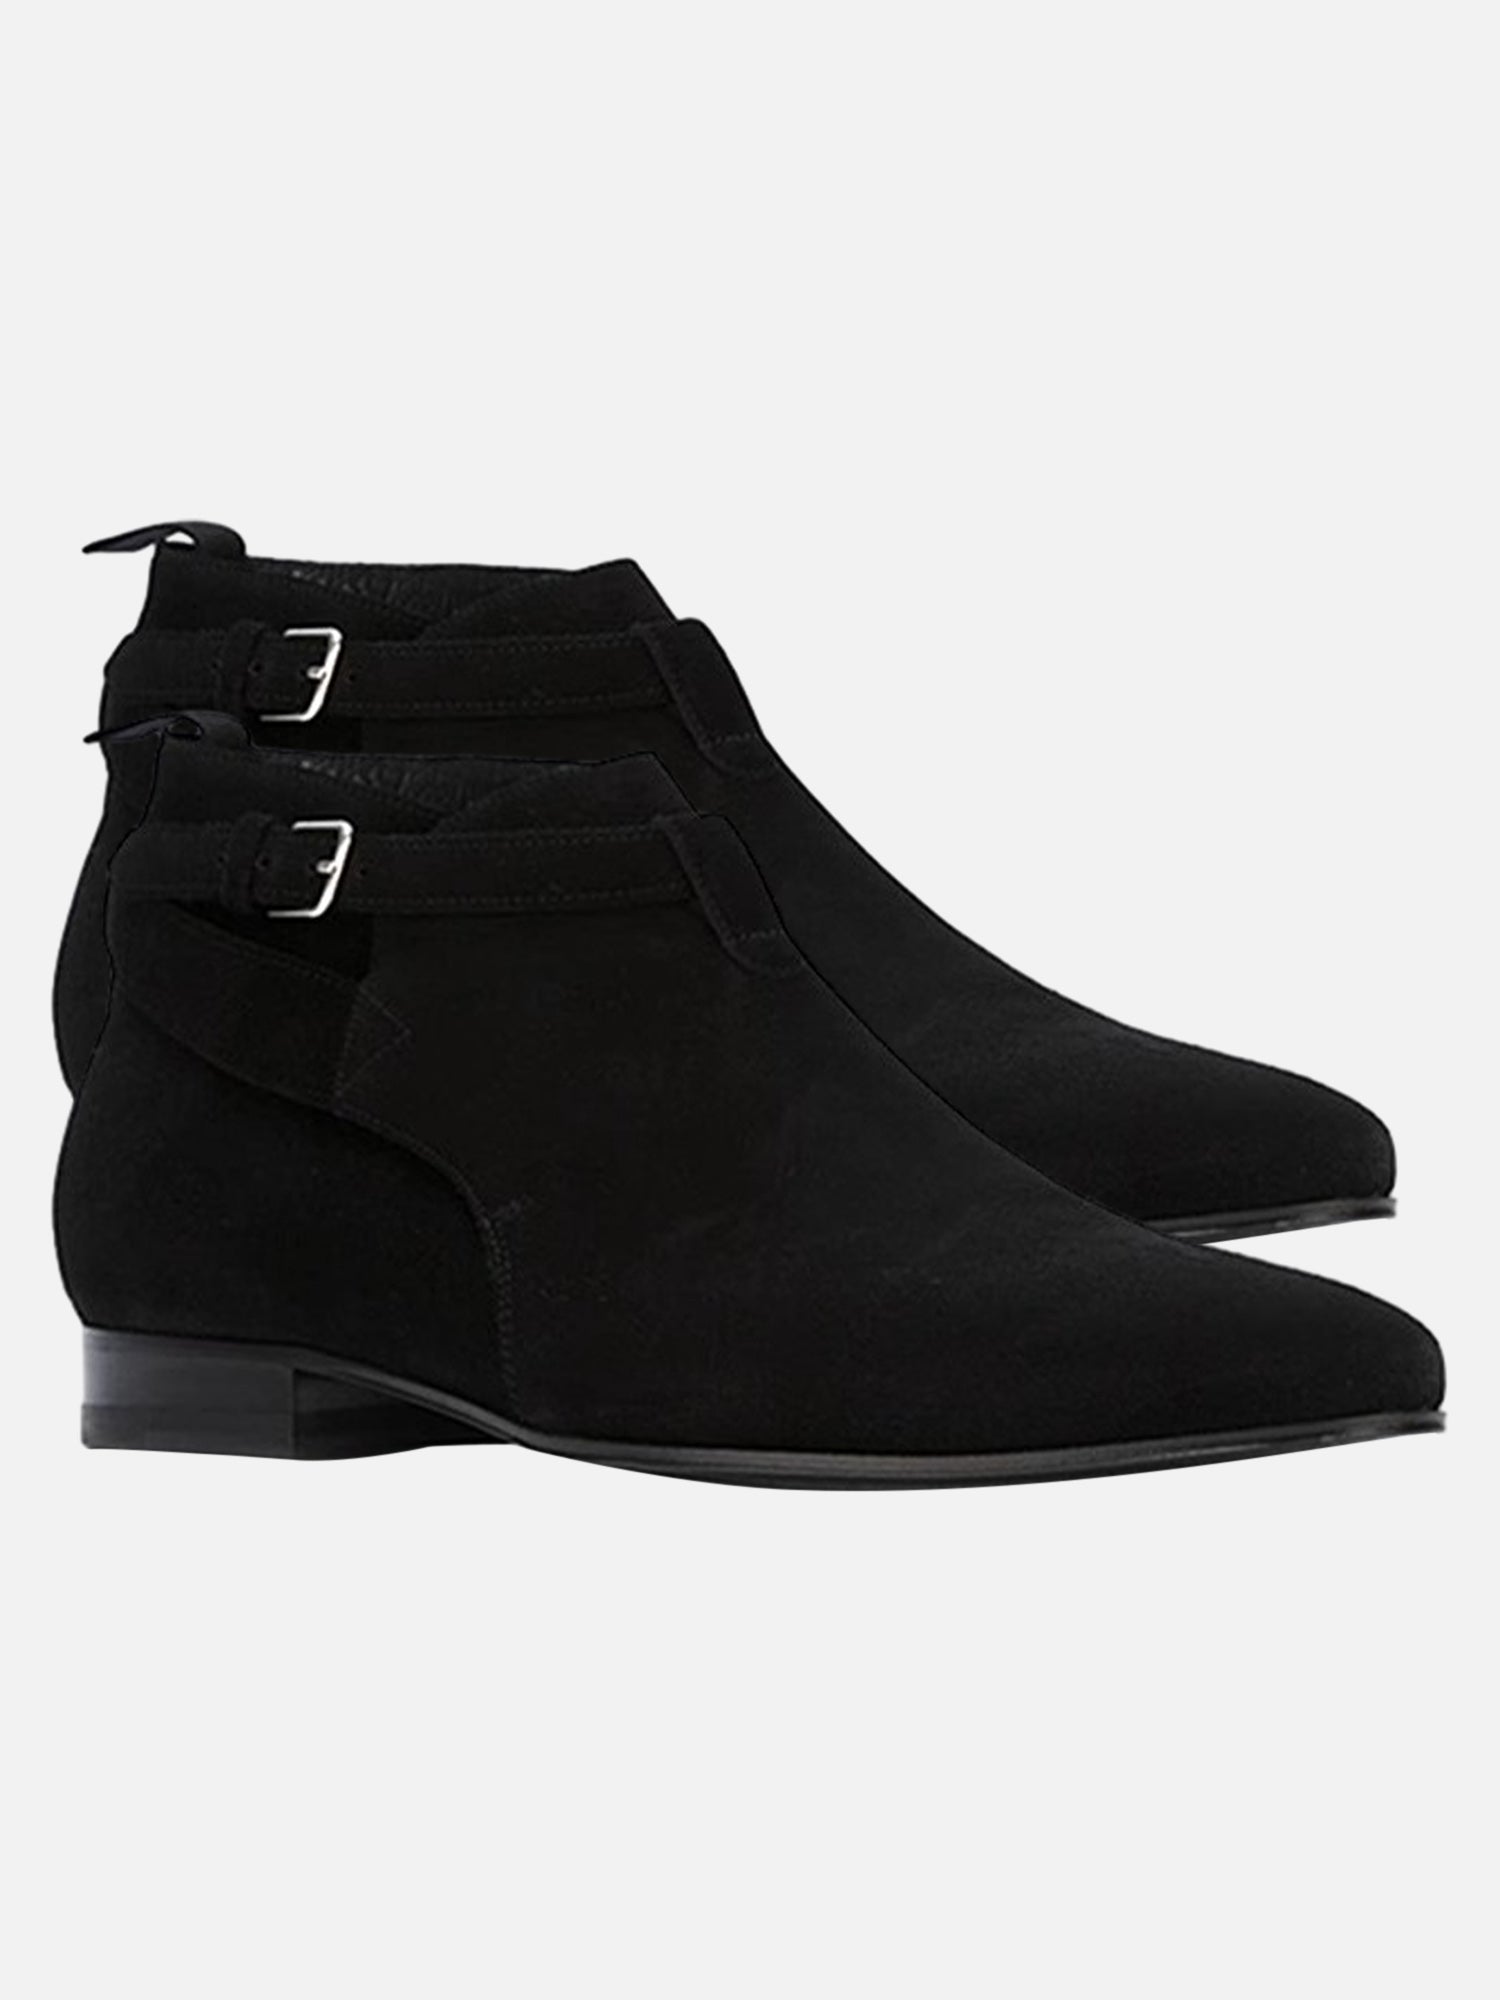 Pointed Toe British Style Buckled Chelsea Boots